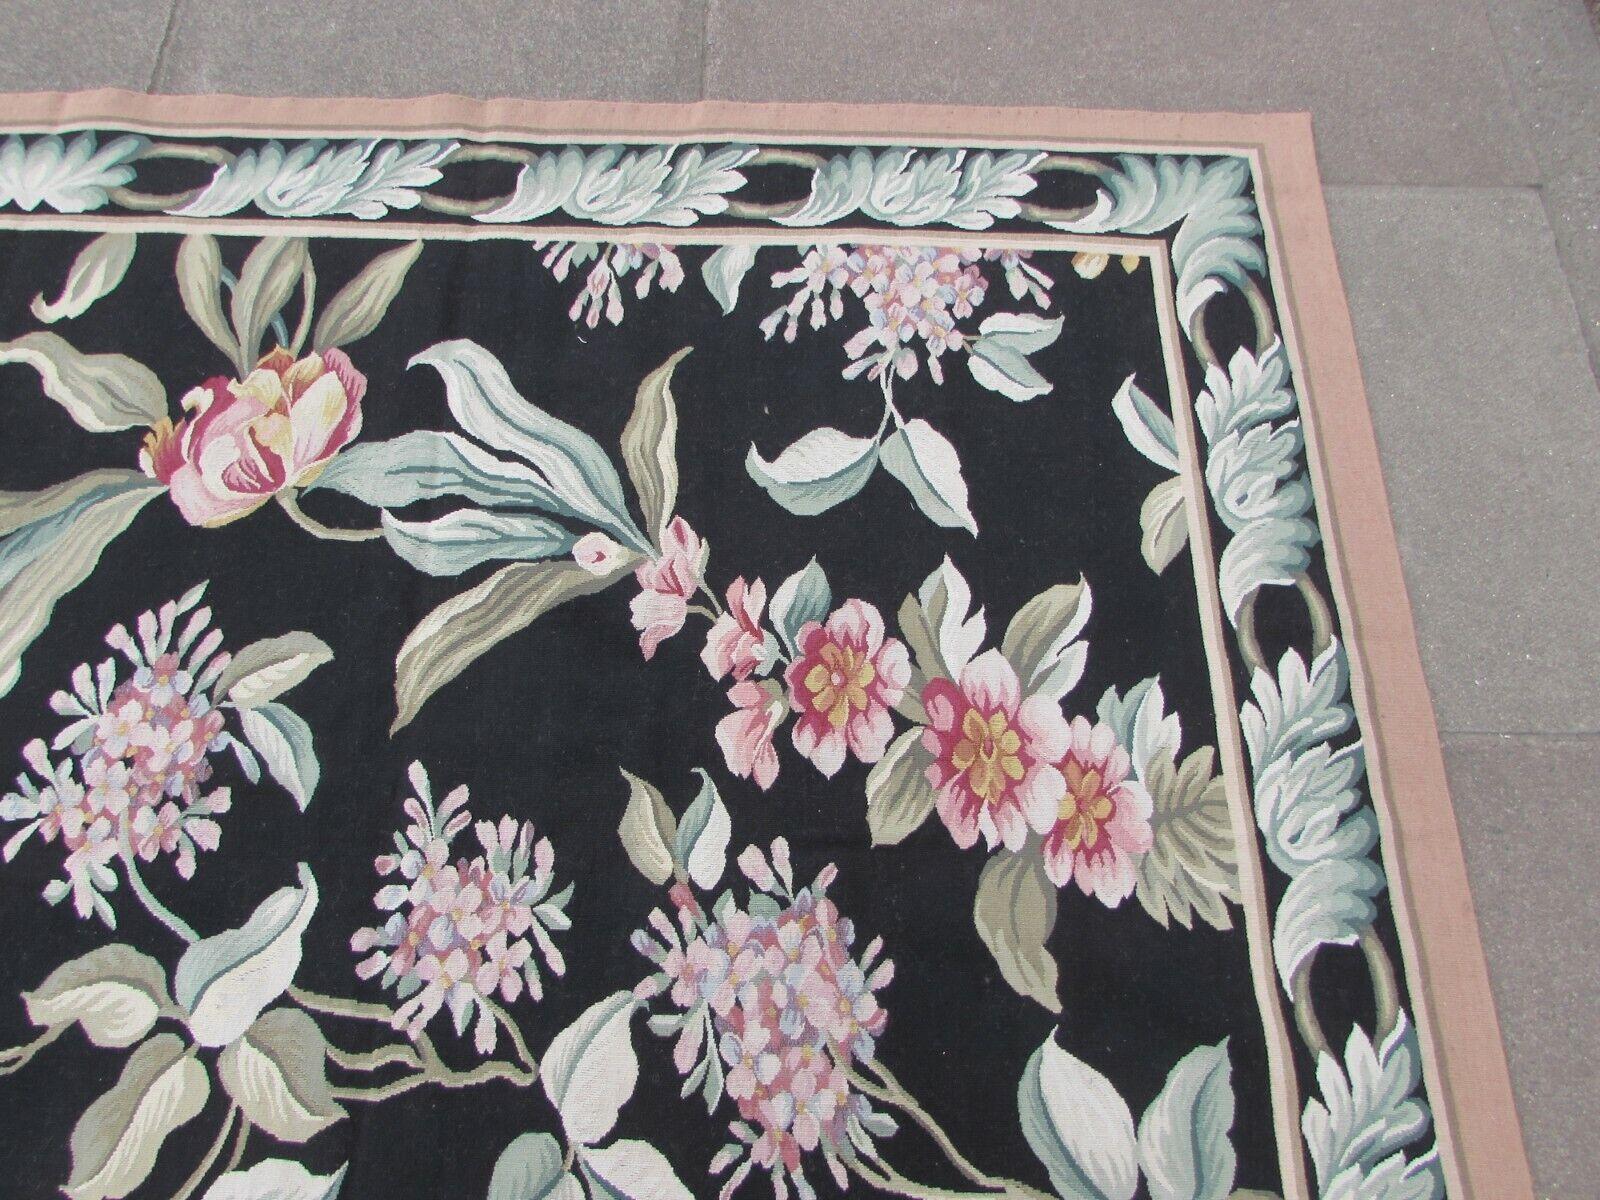 Handmade Vintage French Aubusson Rug 8.8' x 12.2', 1970s, 1Q51 In Good Condition For Sale In Bordeaux, FR